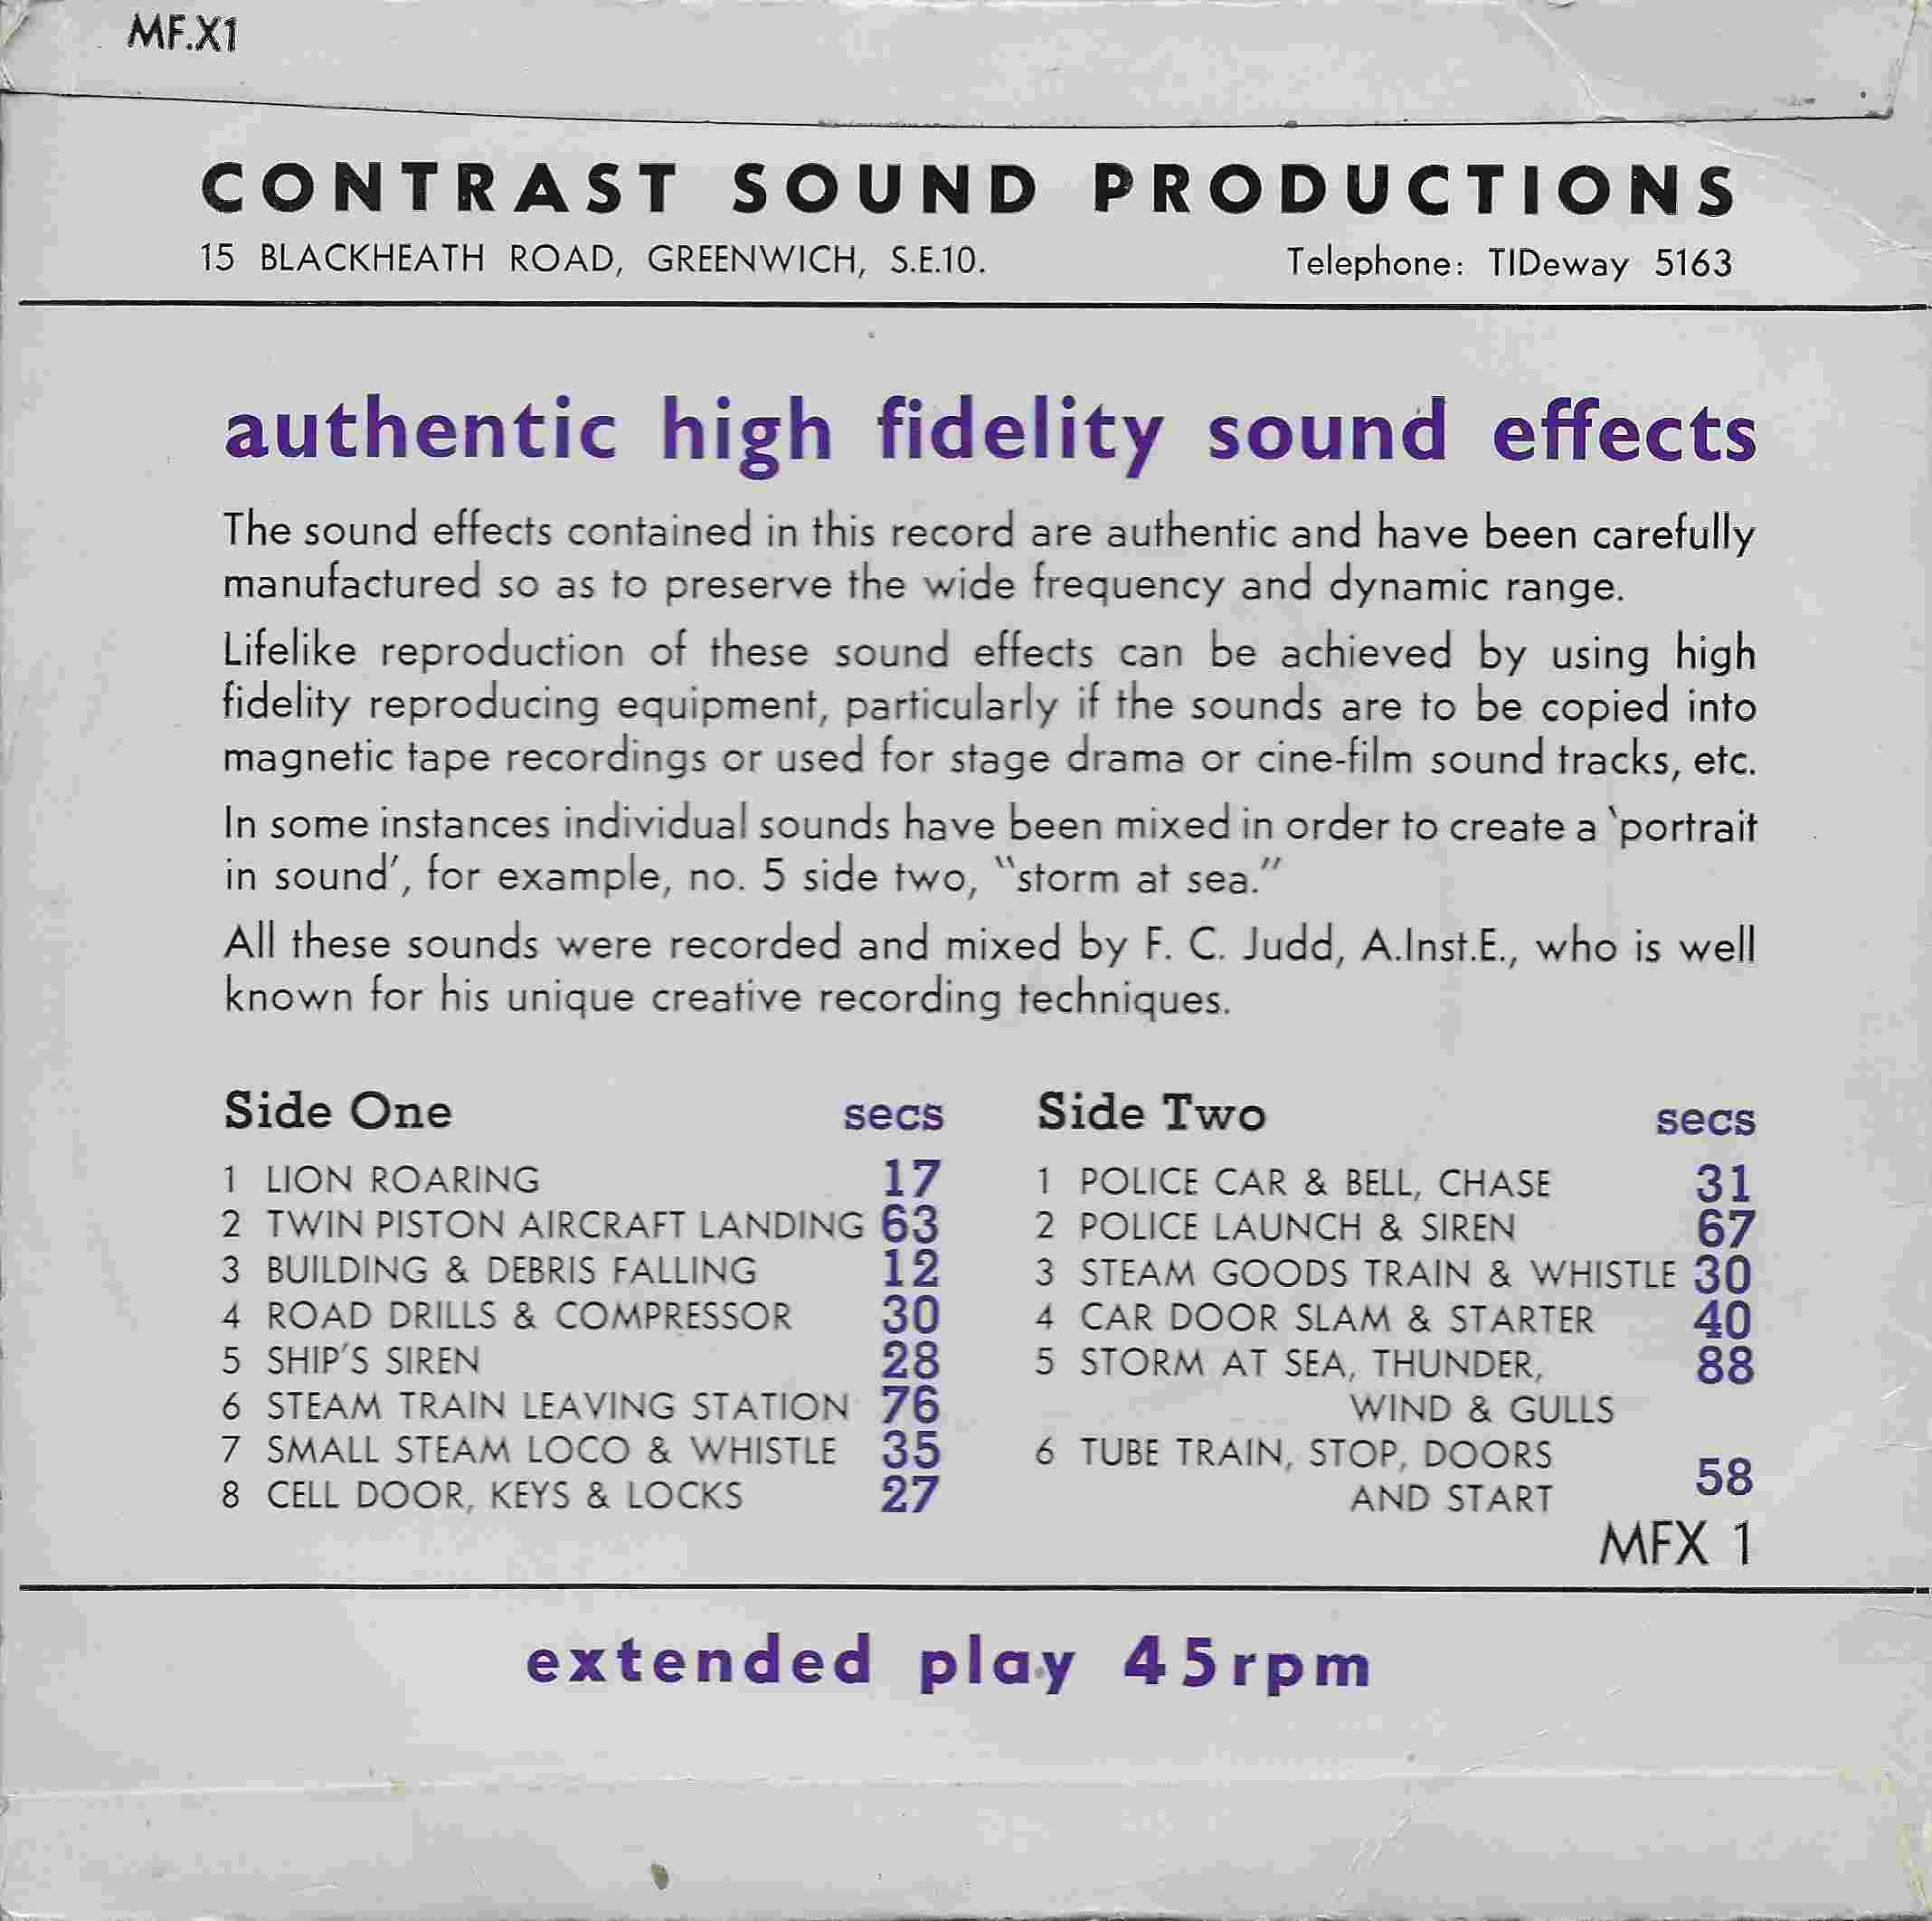 Picture of MFX . 1 Mixed sound effects by artist F. C. Judd from ITV, Channel 4 and Channel 5 library